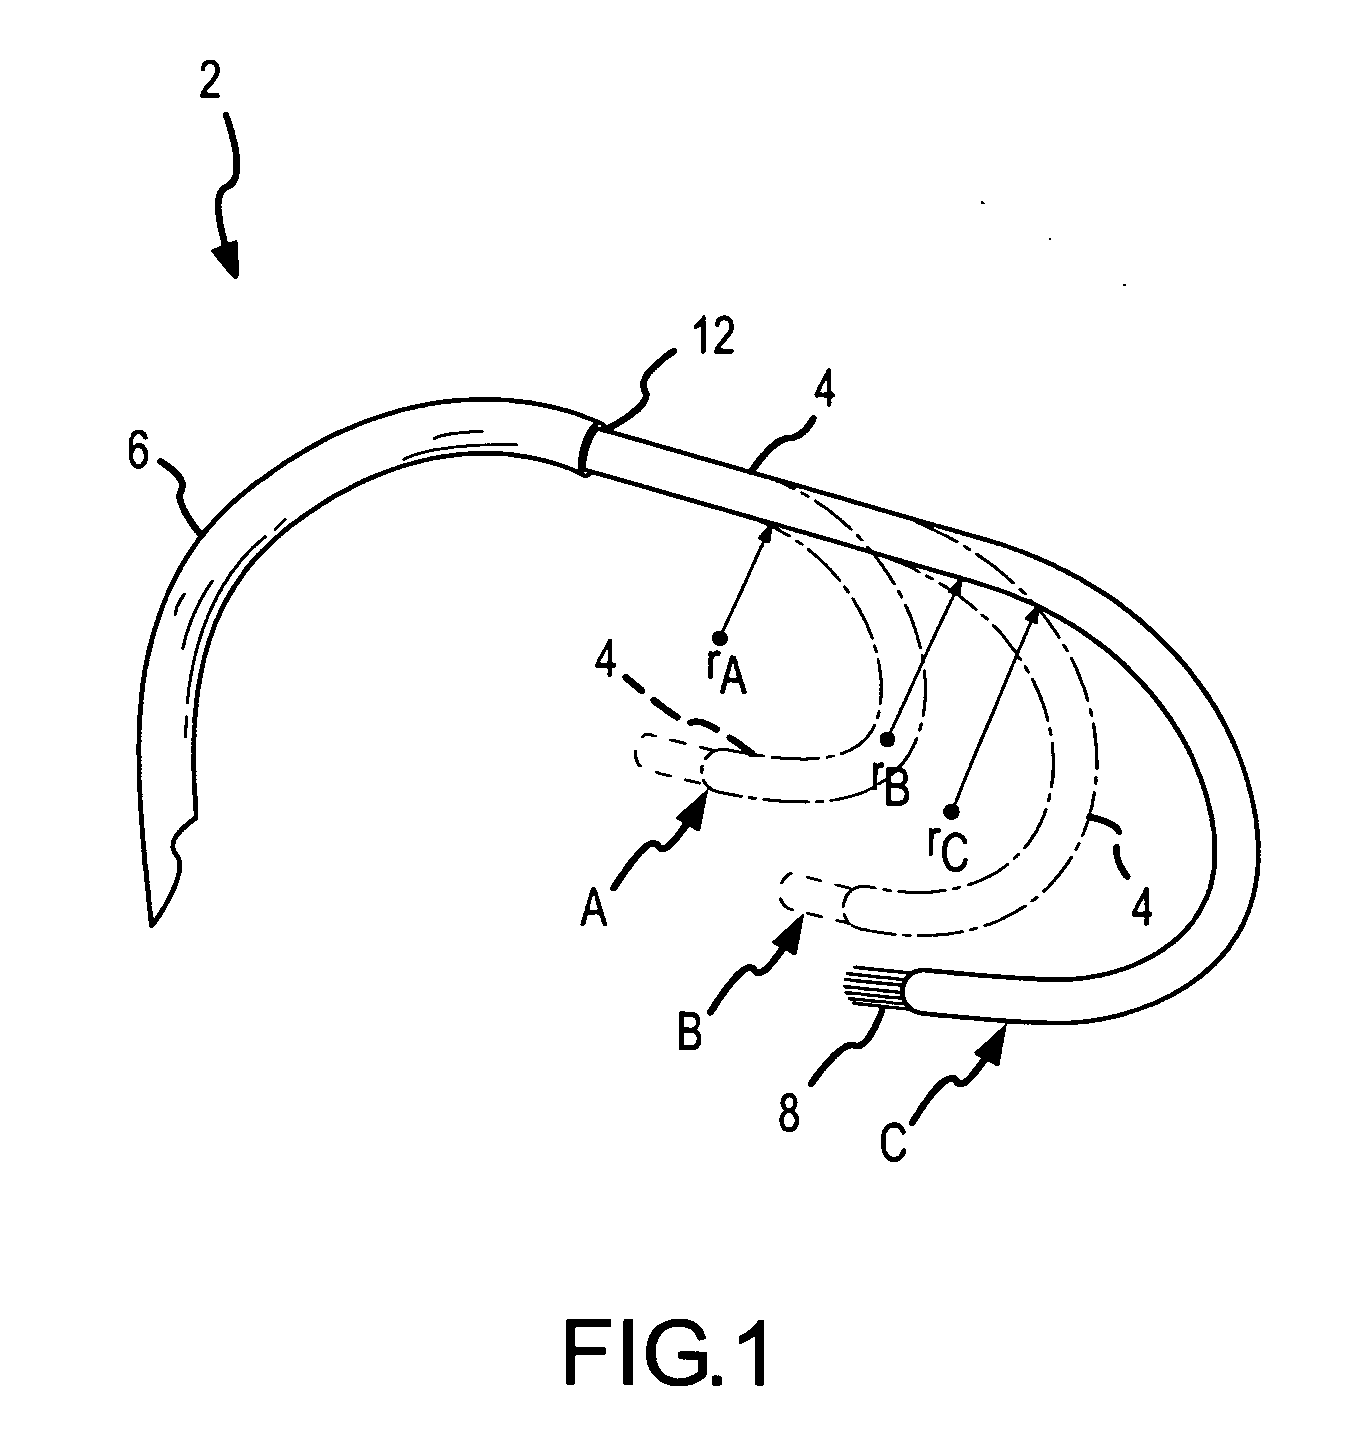 Curved ablation catheter